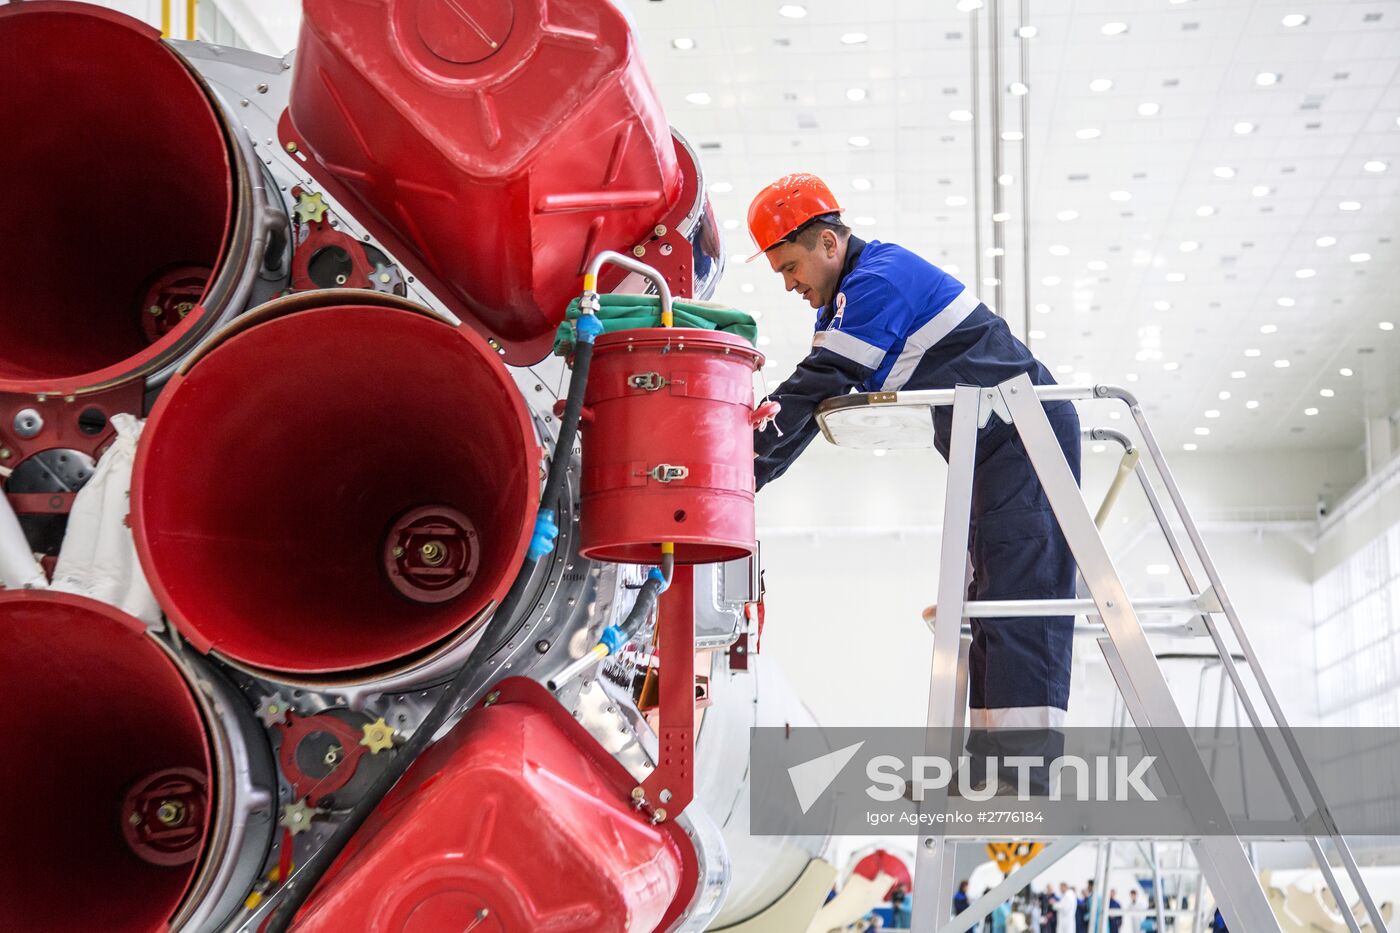 Assembling rocket-cqrrier "Soyuz" for the first launch from Vostochny spaceport